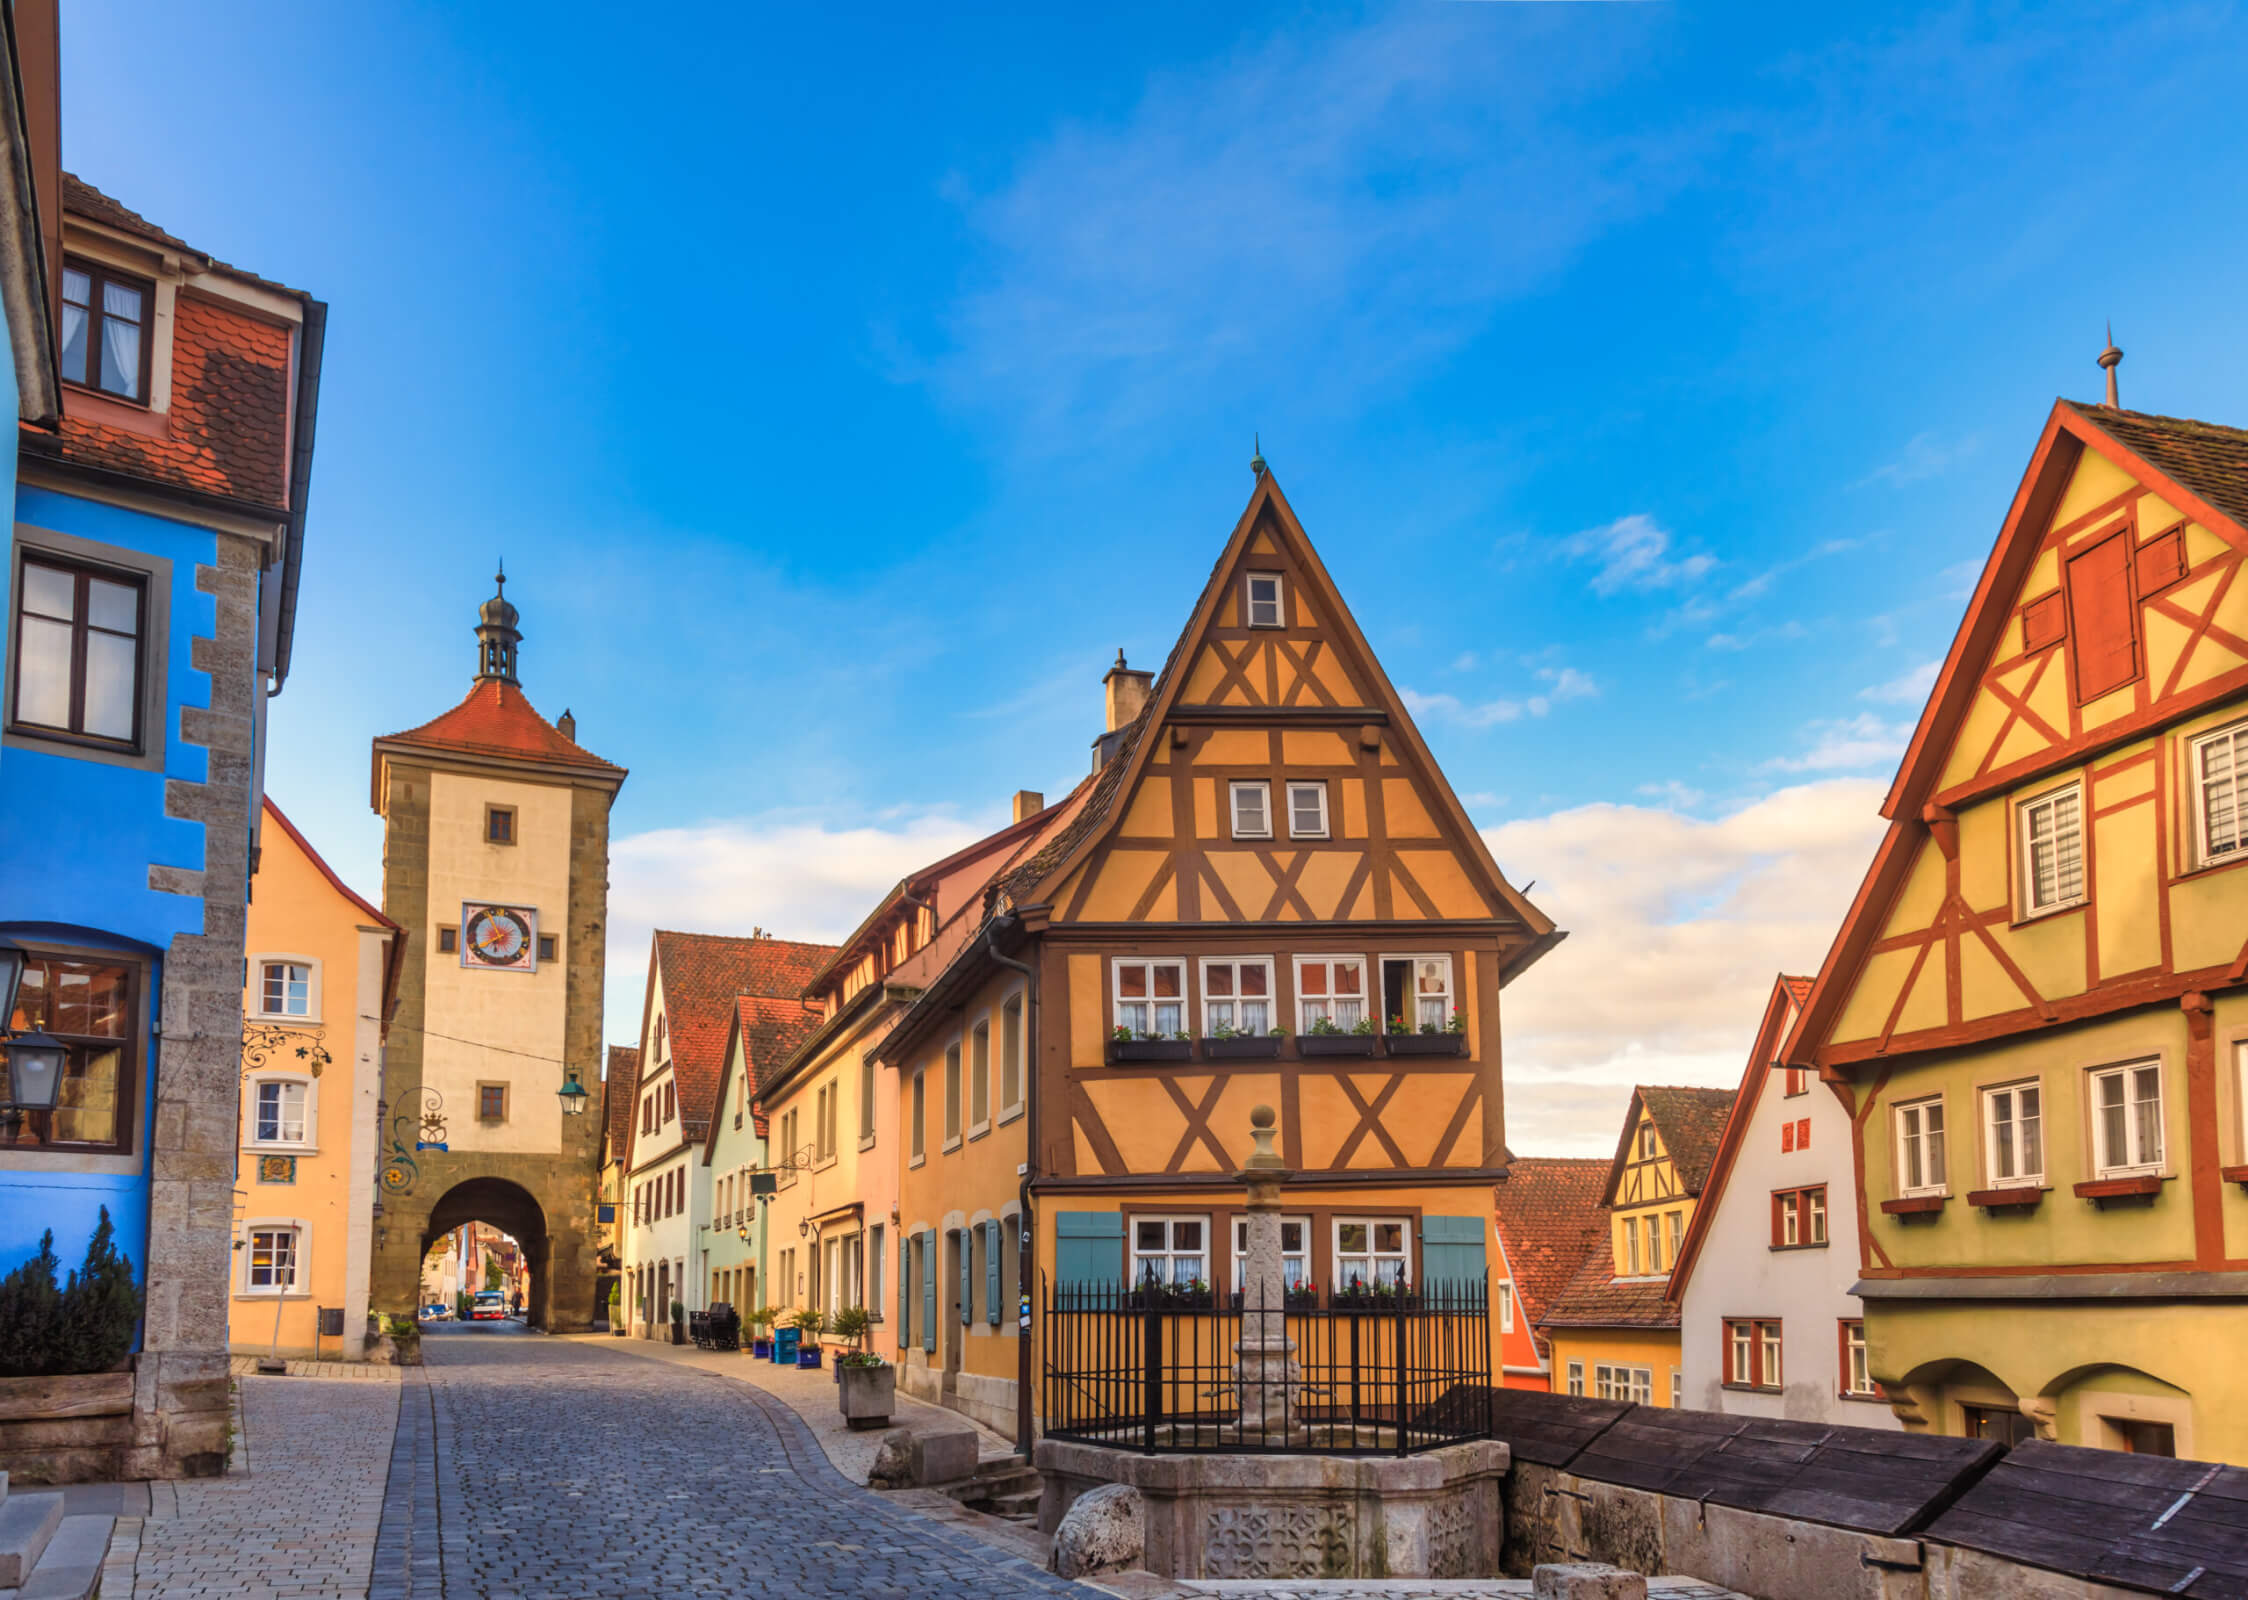 Image of a town along Germany's Romantic Road.